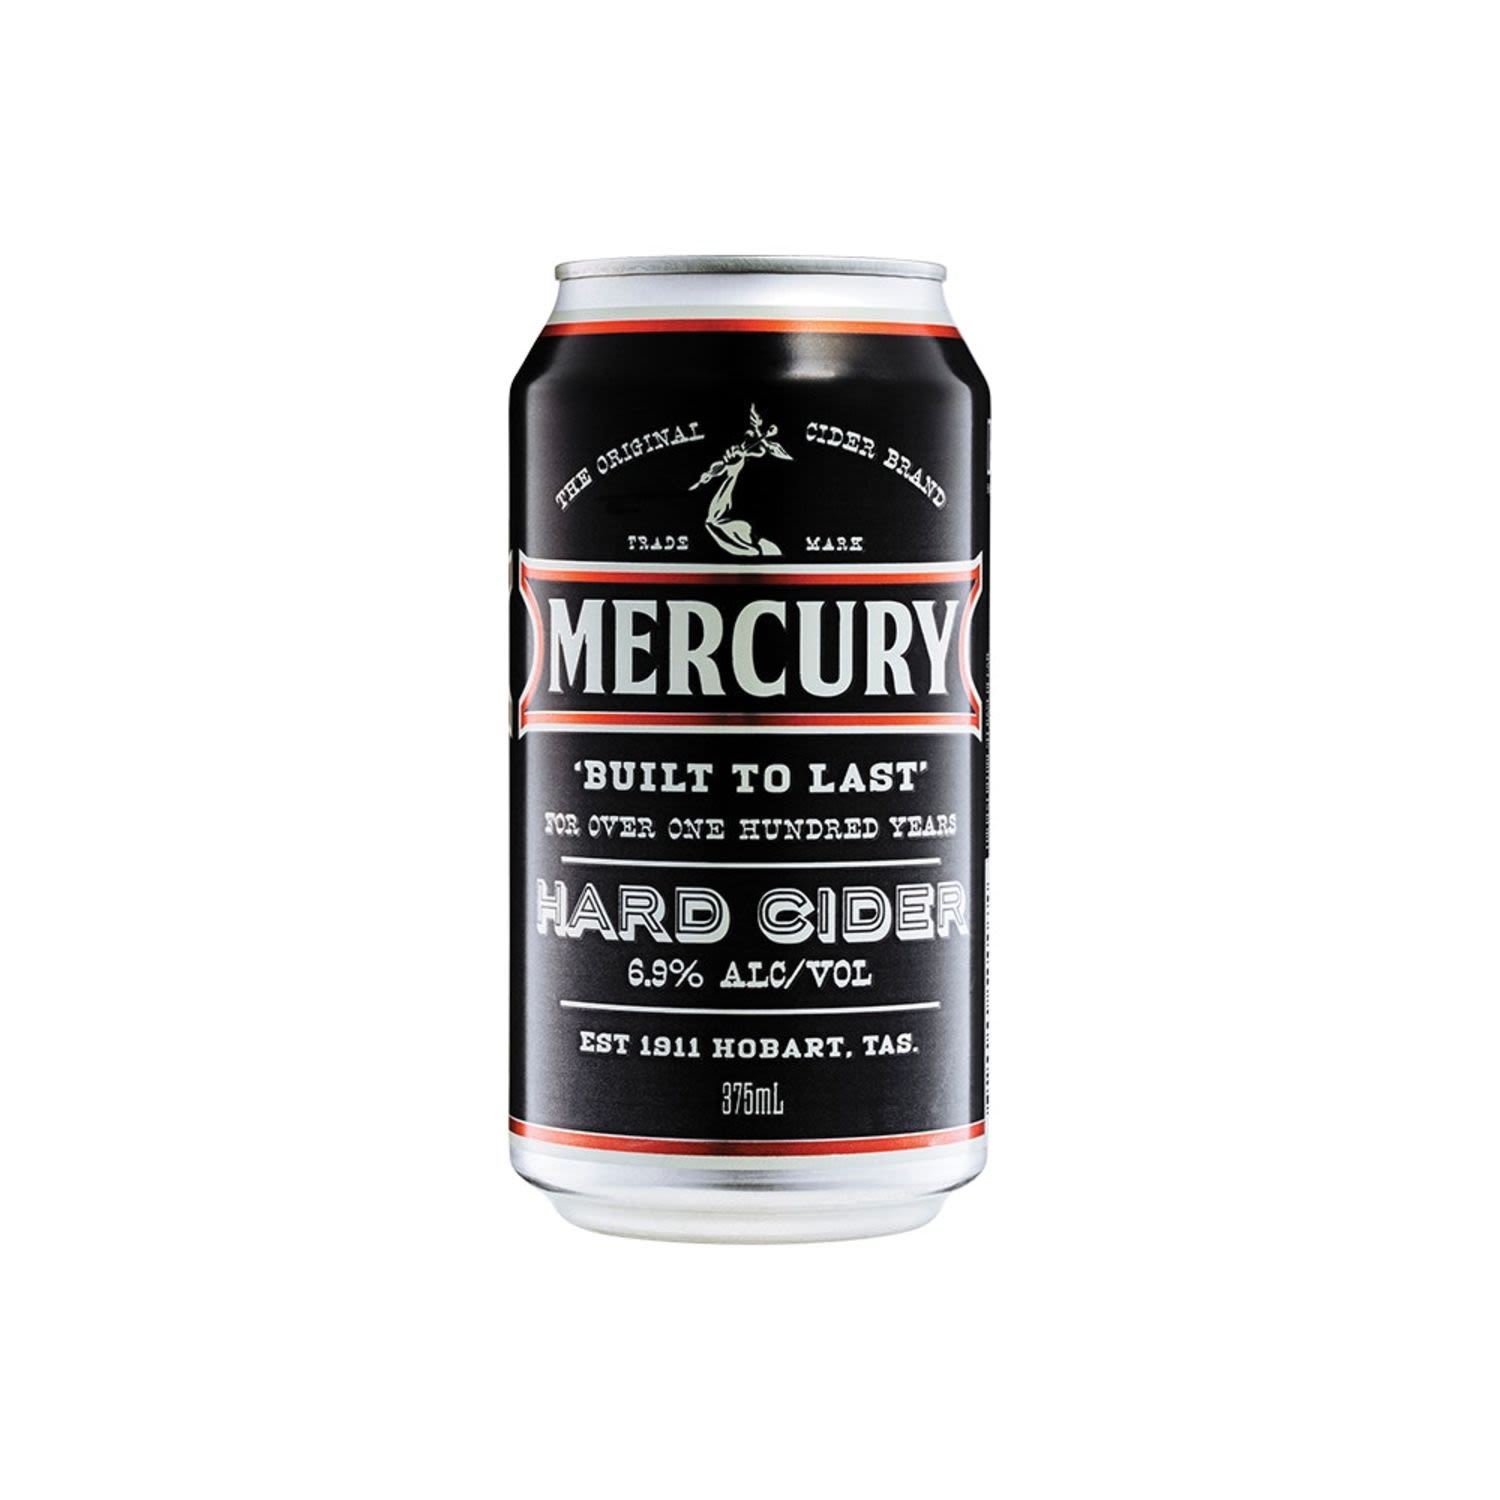 Mercury Hard Cider is inspired by traditional hard ciders. The higher alcohol gives a richer, fuller flavoured taste while still retaining a smooth, crisp finish.<br /> <br />Alcohol Volume: 6.90%<br /><br />Pack Format: Can<br /><br />Standard Drinks: 2</br /><br />Pack Type: Can<br /><br />Country of Origin: Australia<br />